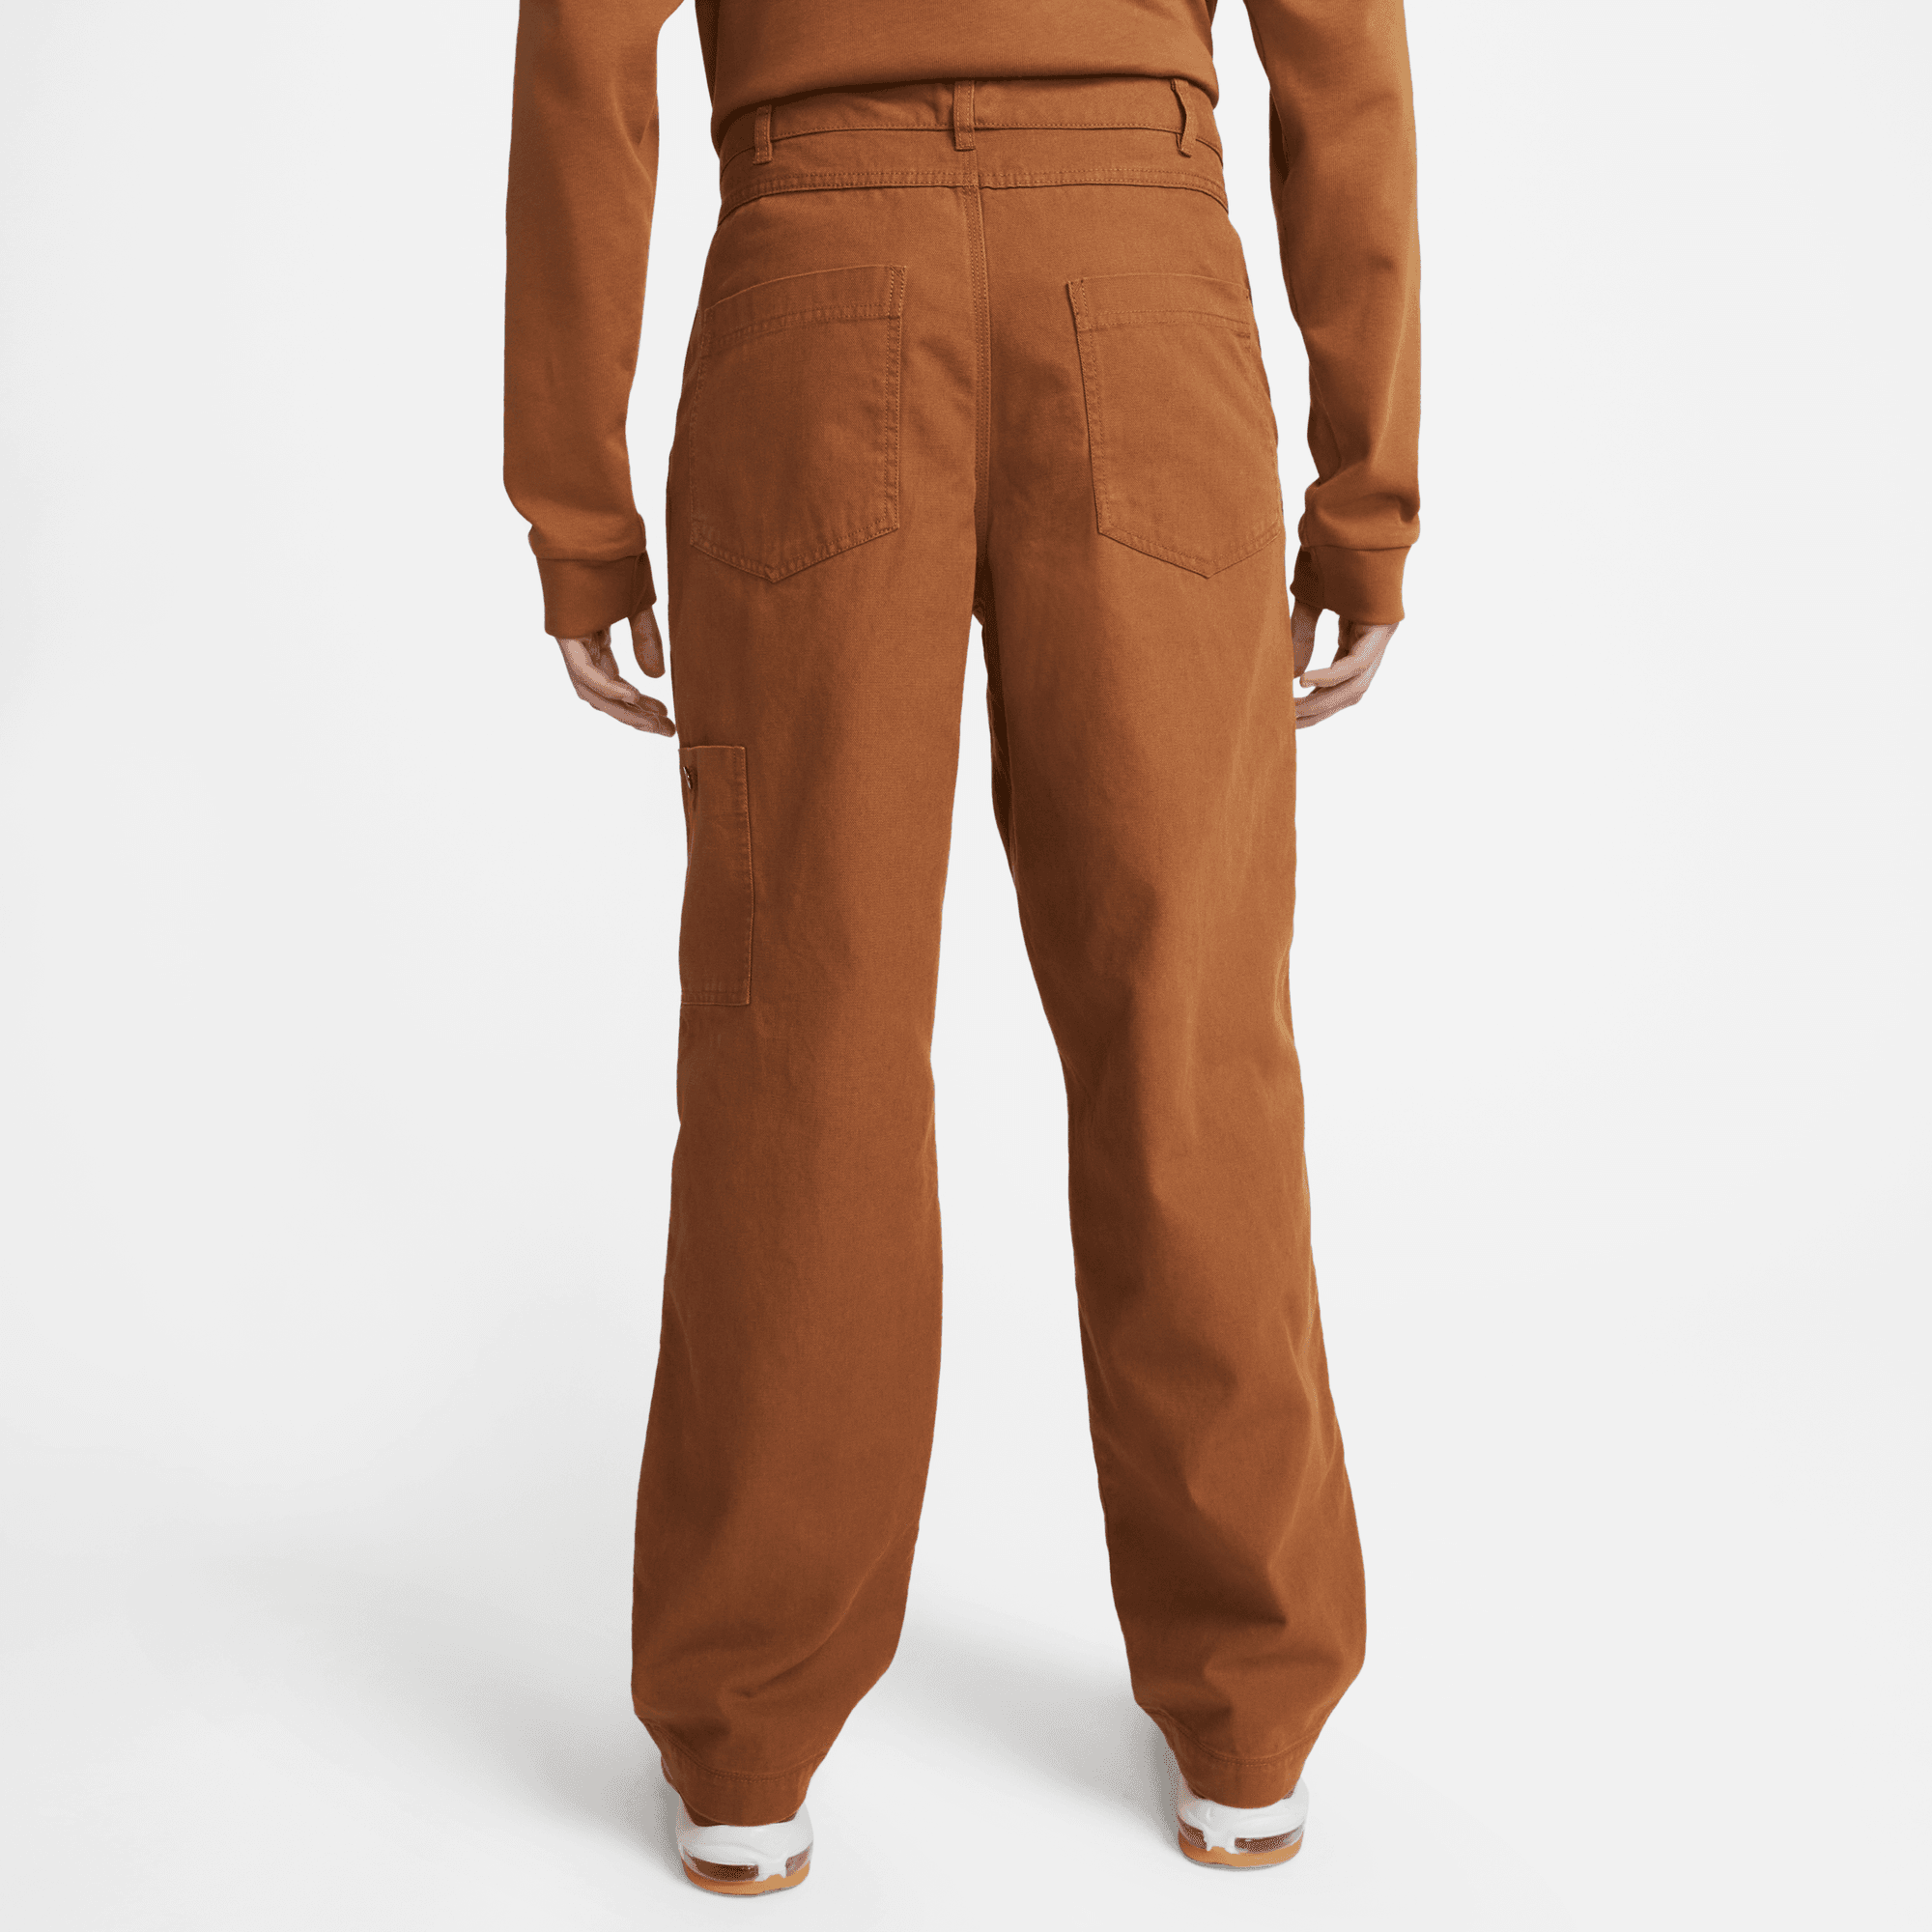 Nike Life Men's Double-Front Trousers DQ5179-270 Brown